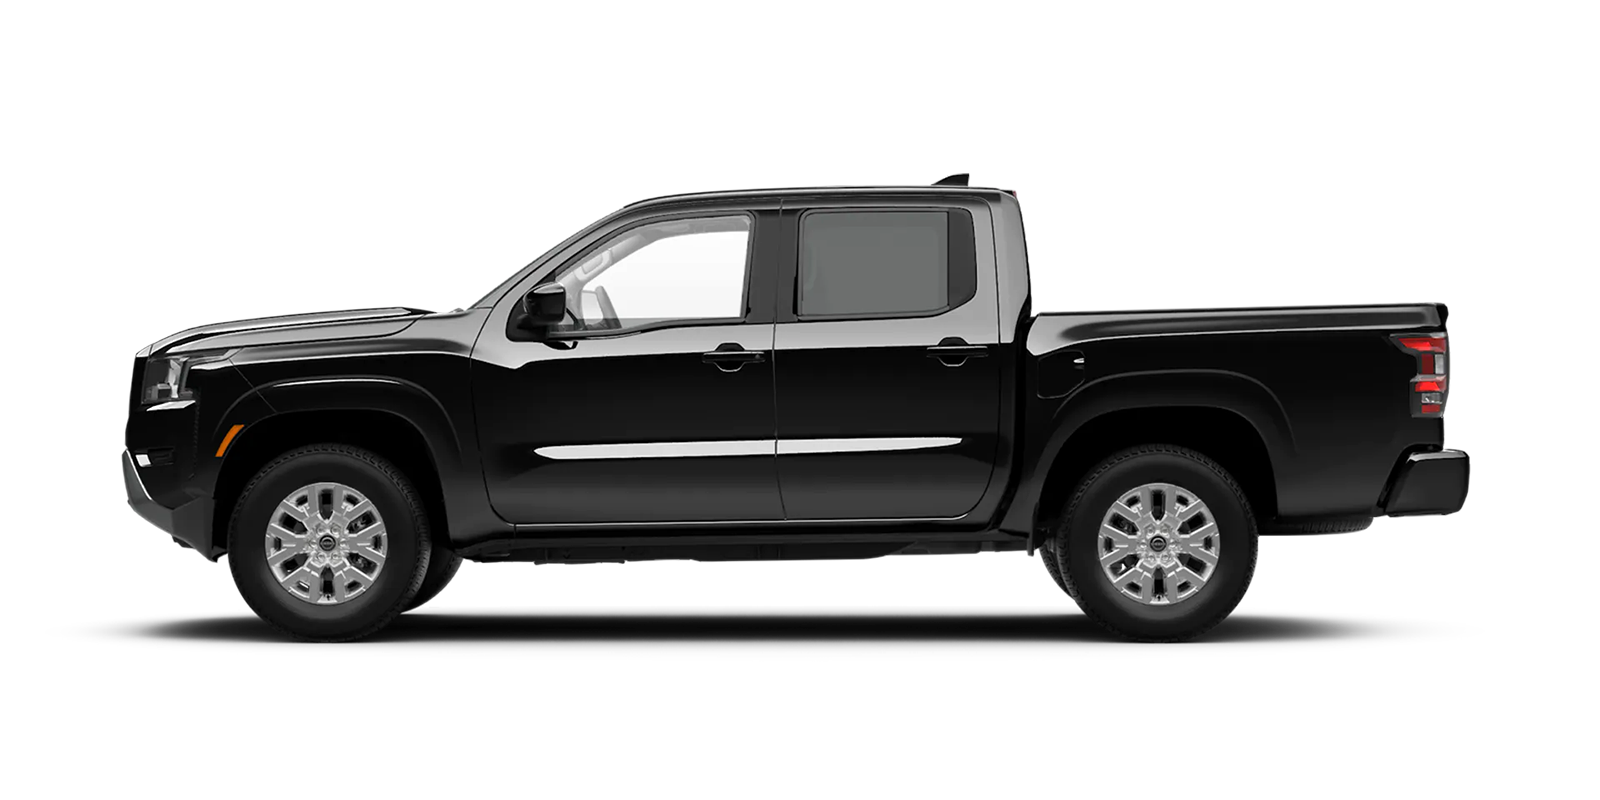 2022 Frontier Crew Cab SV 4x2 in Super Black | Rusty Wallace Nissan in Knoxville TN